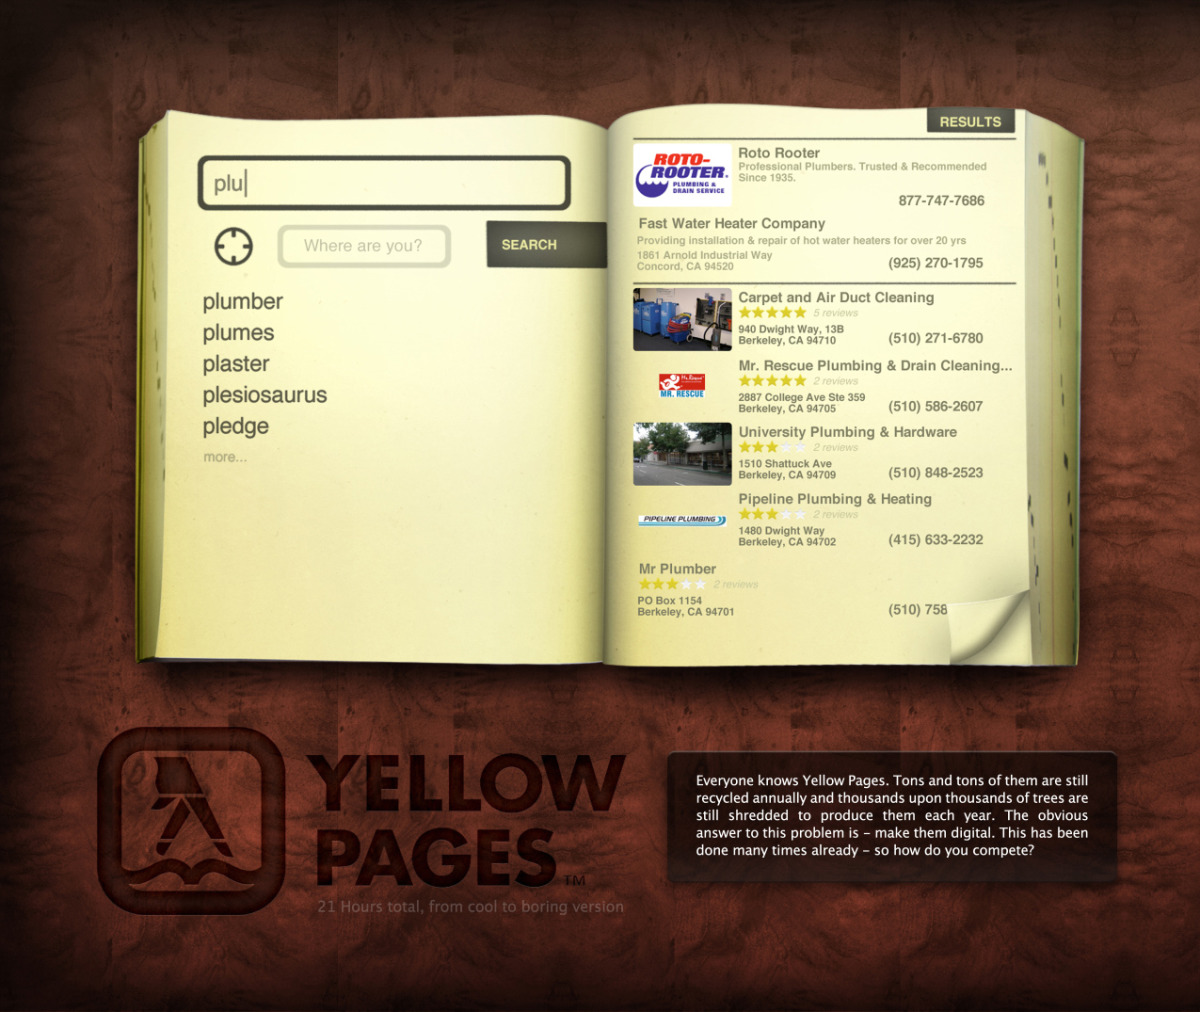 yellowpages_a.jpg